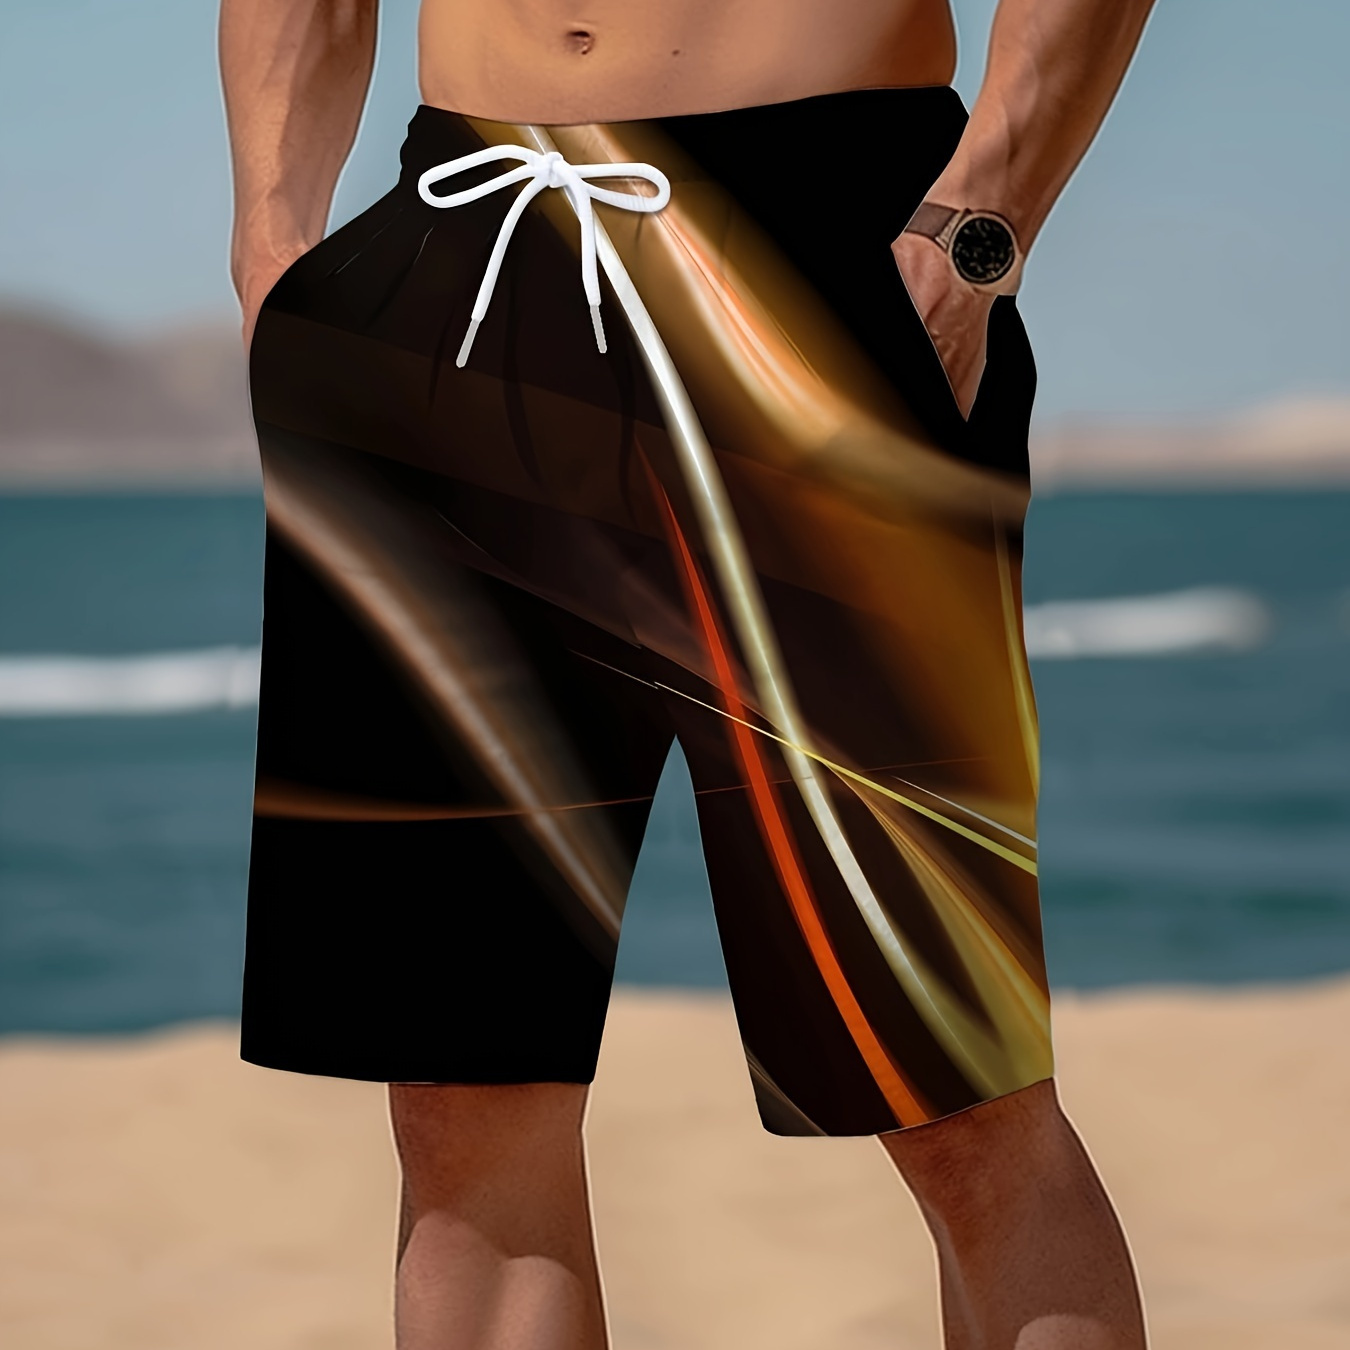 

Irregular Geometric Graphic Pattern Men's Sports Shorts With Drawstring And Pockets, Trendy And Chic Shorts For Summer Fitness Workout And Outdoors Wear